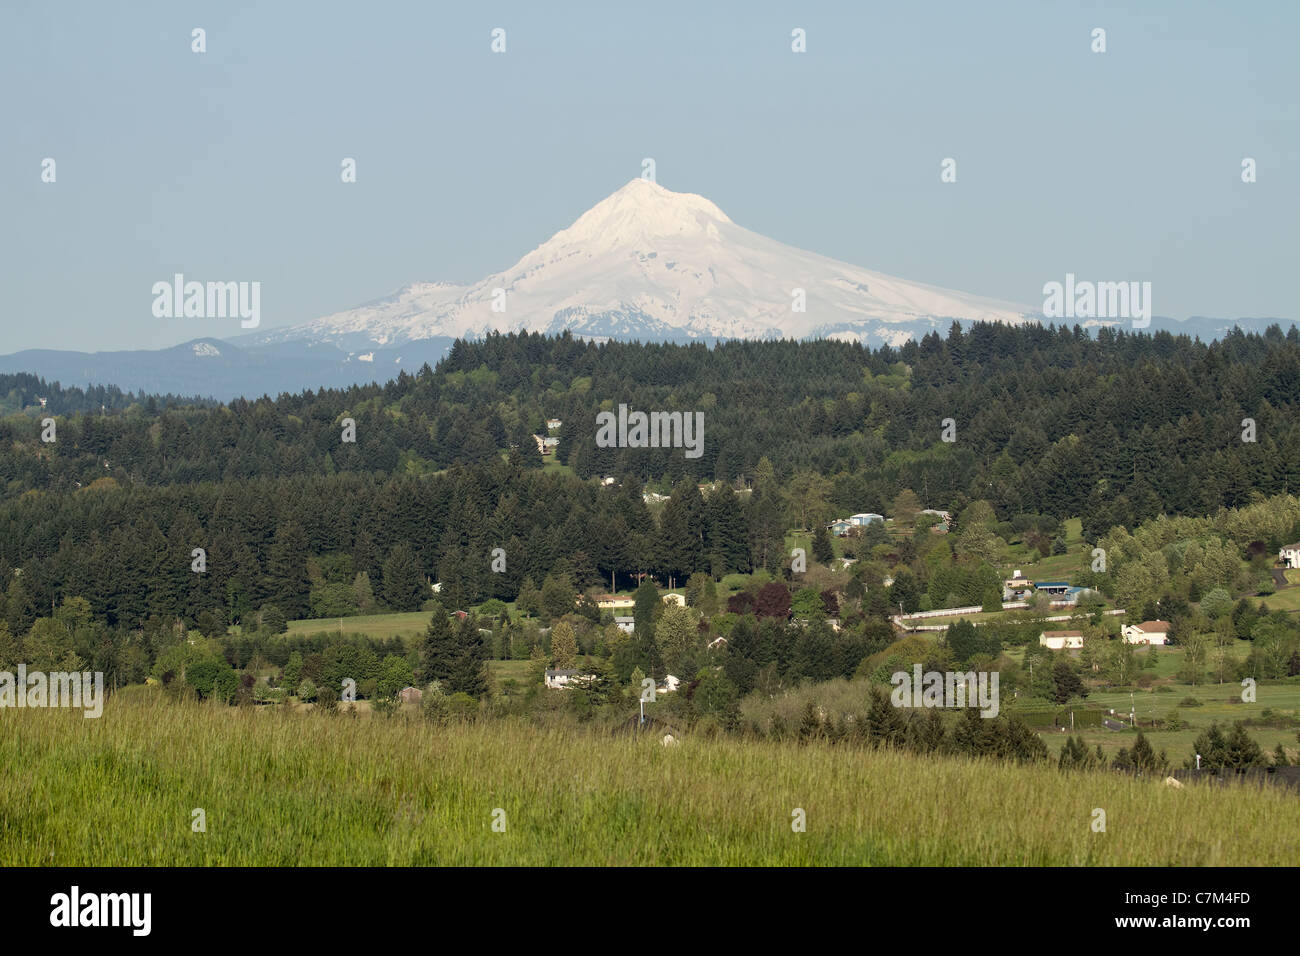 Mount Hood from Happy Valley Oregon Scenic View Stock Photo